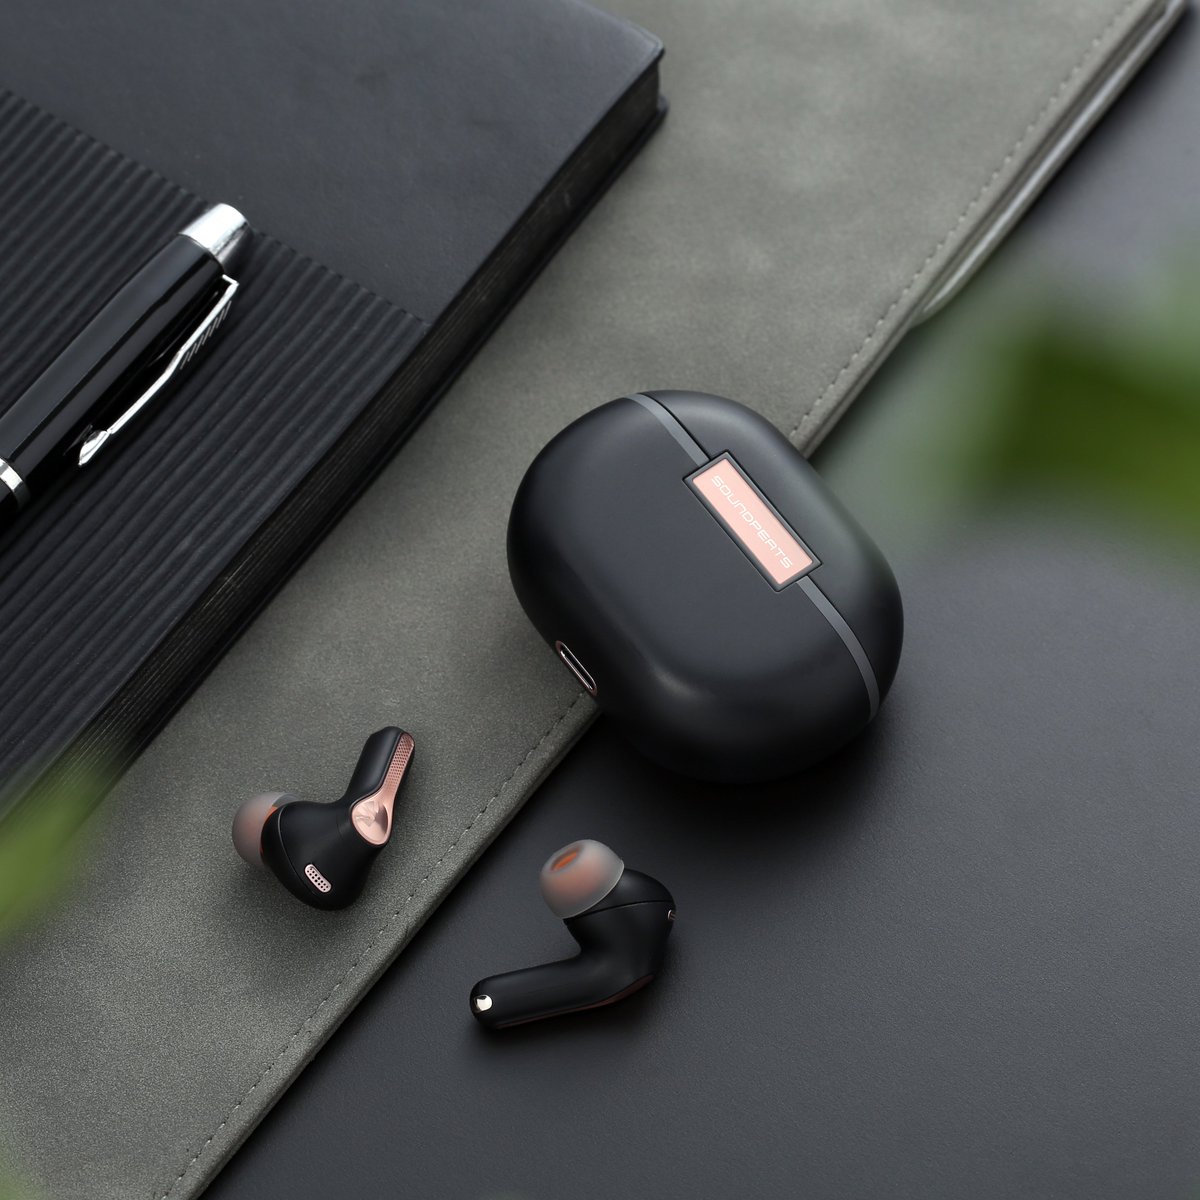 Clean and classic. The perfect pair to cancel out all the unwanted noise around - Capsule3 Pro

Know more: 
us.soundpeats.com/products/capsu…

#soundpeats #capsule3pro #wireless #earbuds #wirelessearphones #bluetooth #headphones #TWS #music #audio #tech #hires #hiresaudio #bass #explore